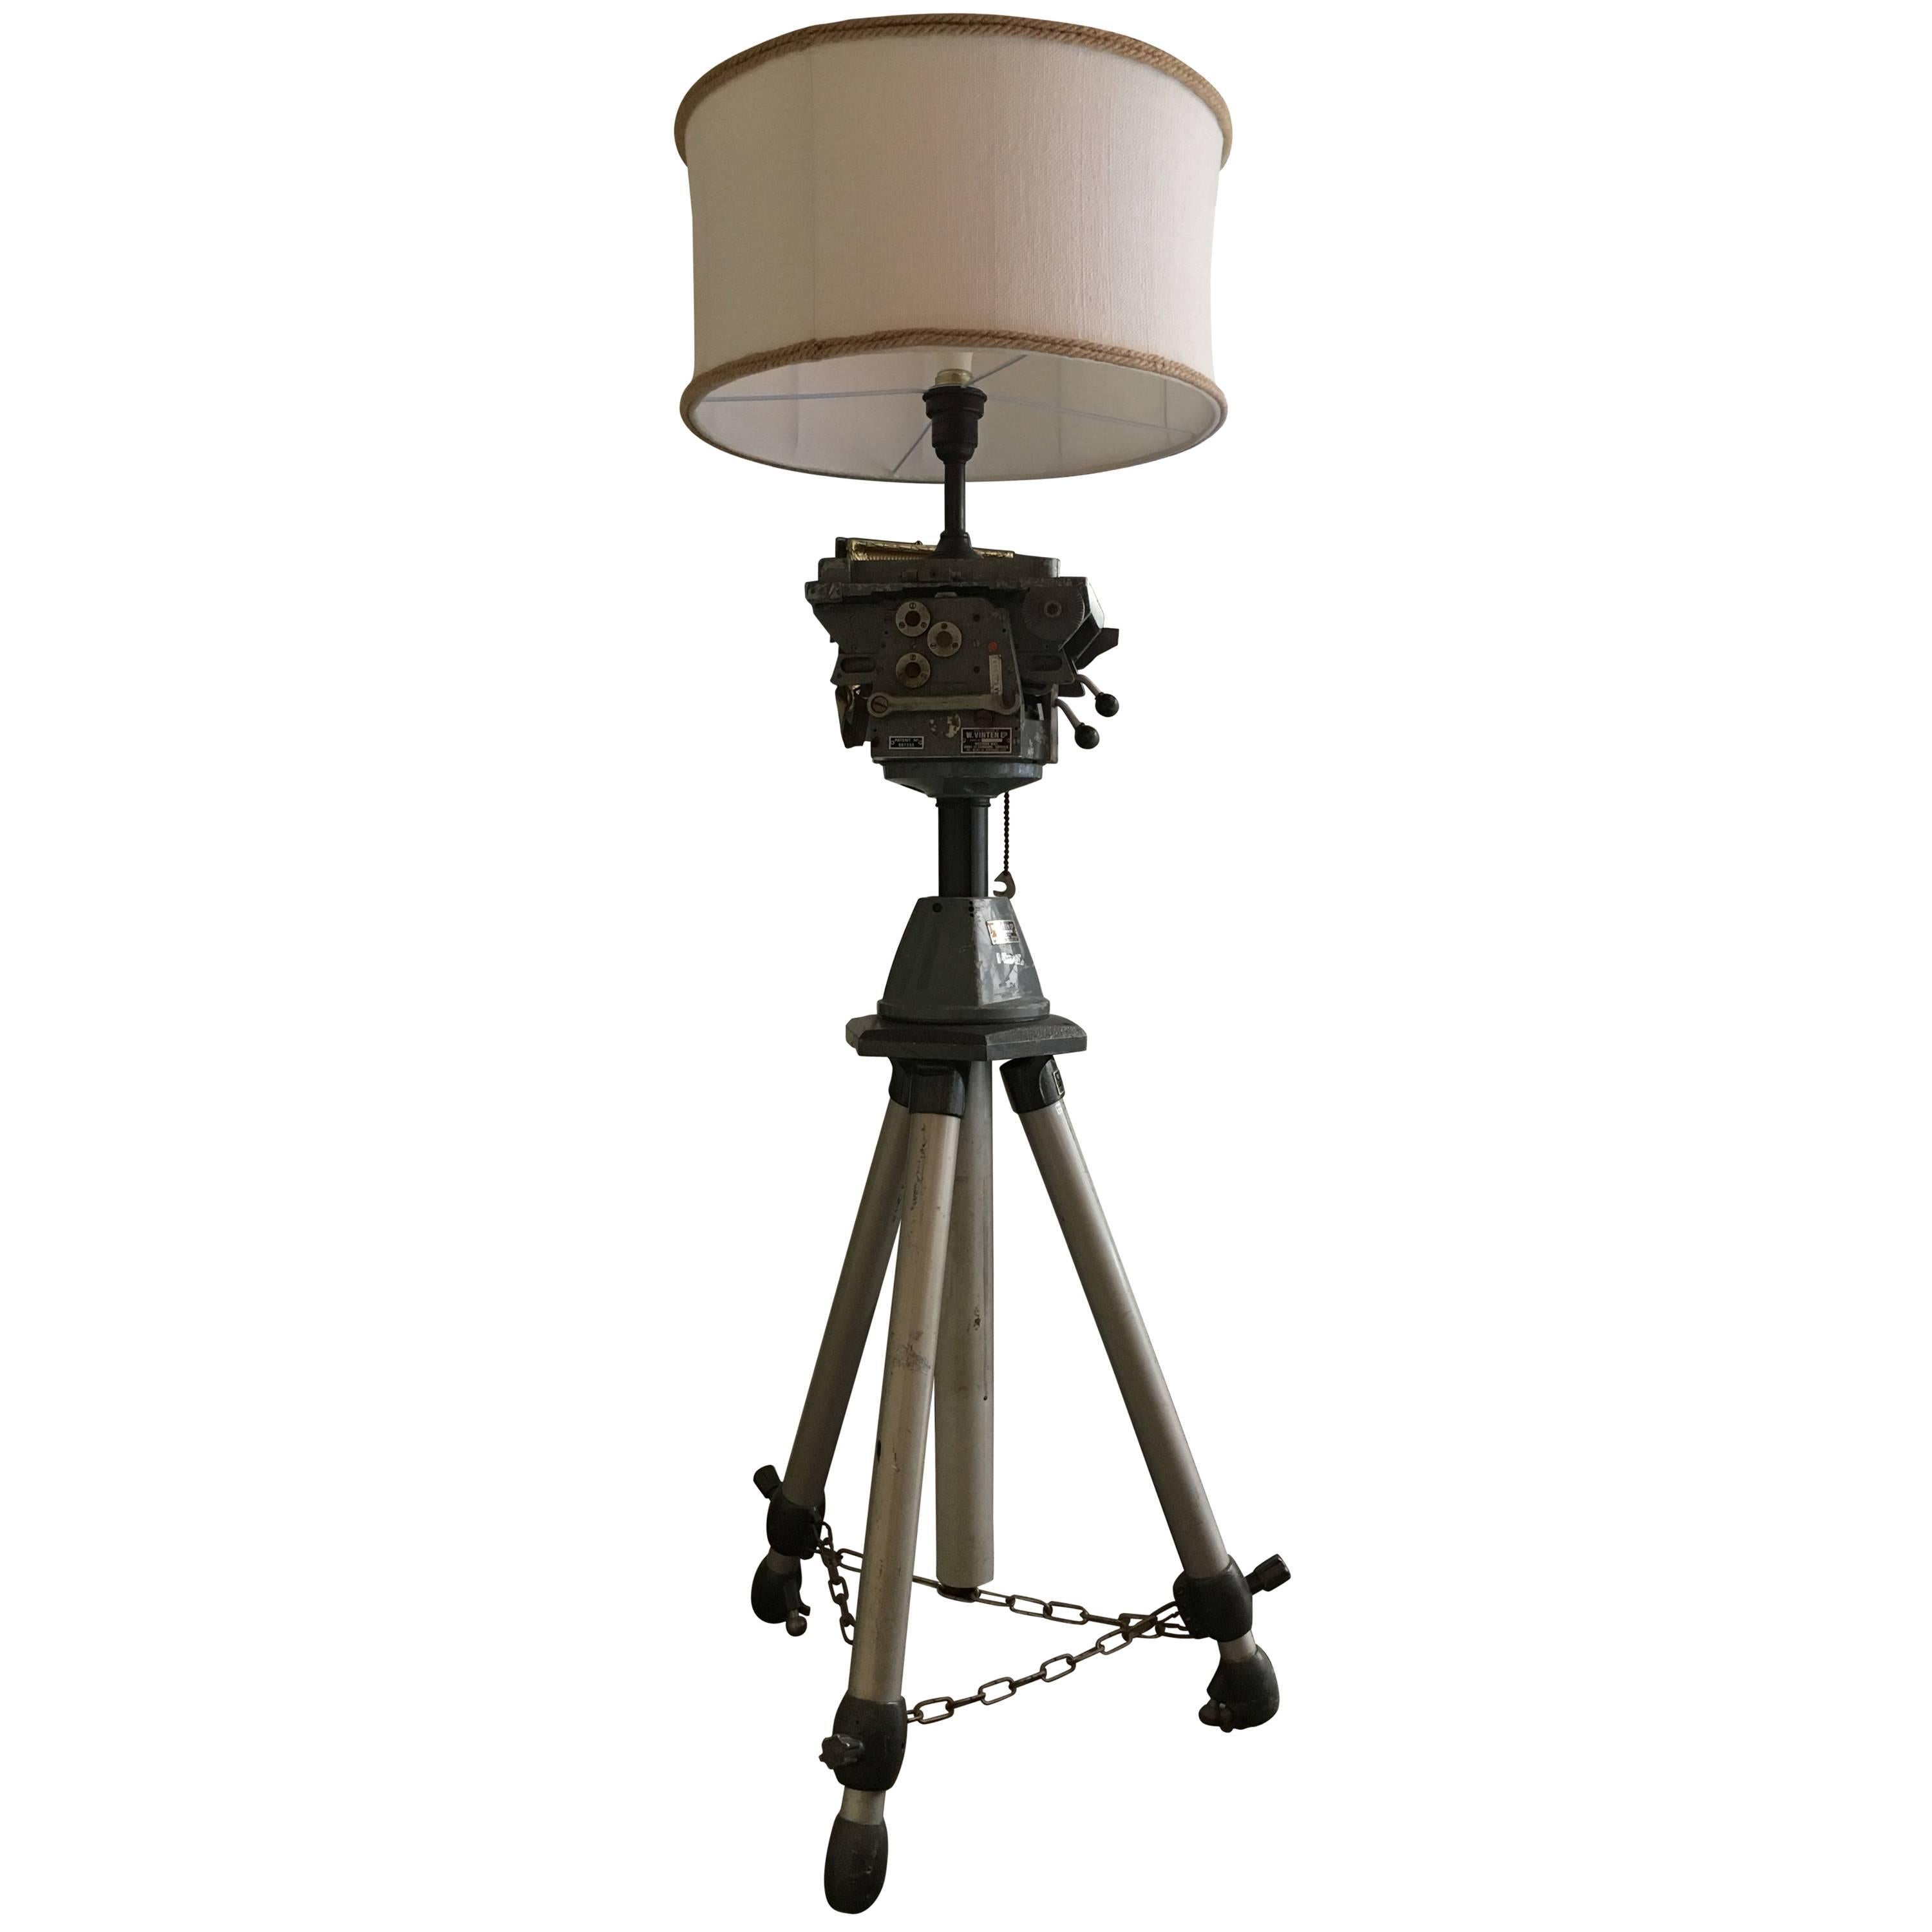 English Industrial Photographic Adjustable Tripod Floor Lamp from 1960s